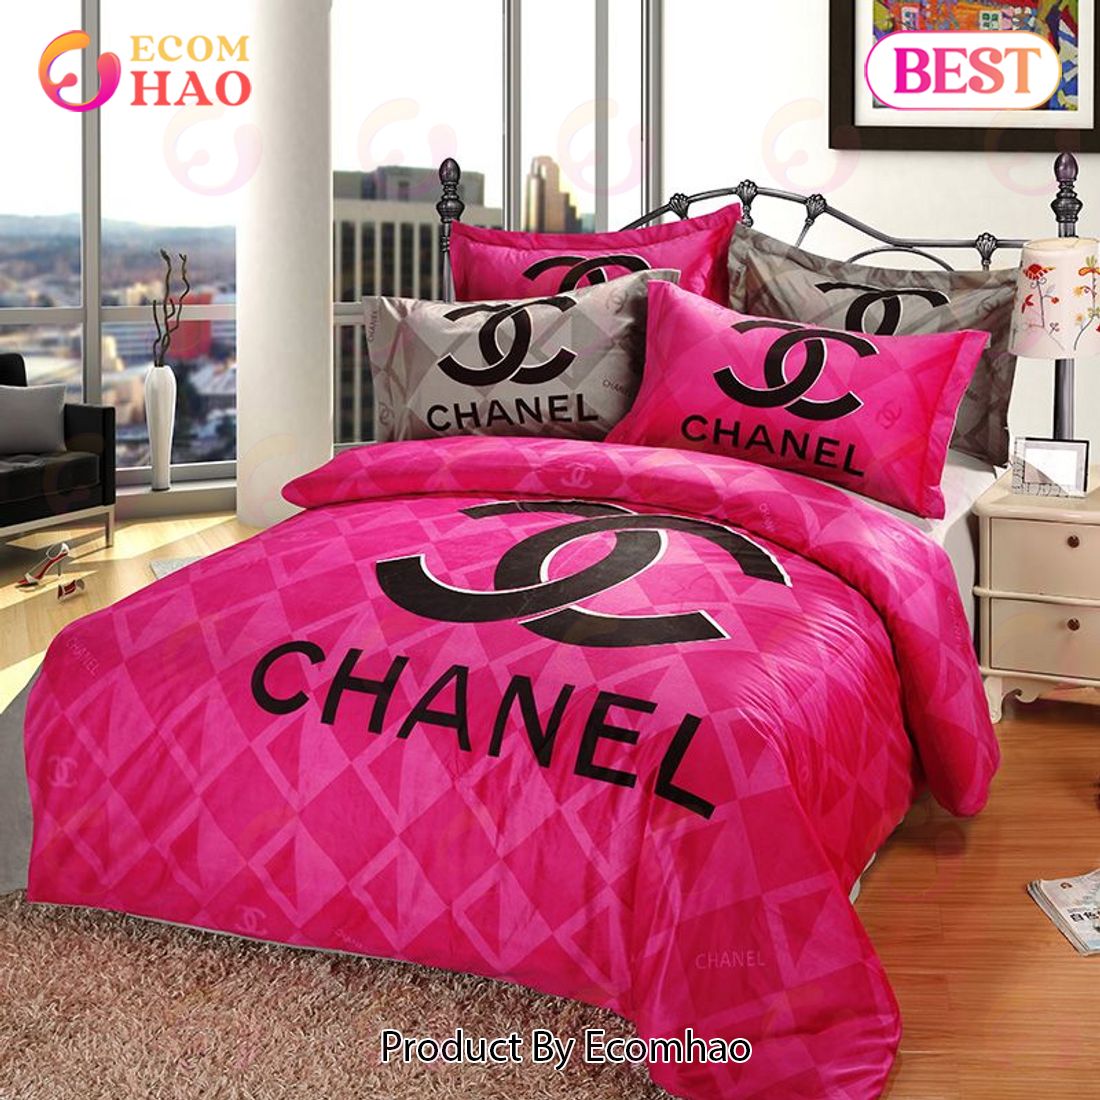 Chanel Pinky Premium Luxury Bedding Setsbed Sets Bedroom Sets Comforter  Sets Duvet Cover Bedspread - Ecomhao Store